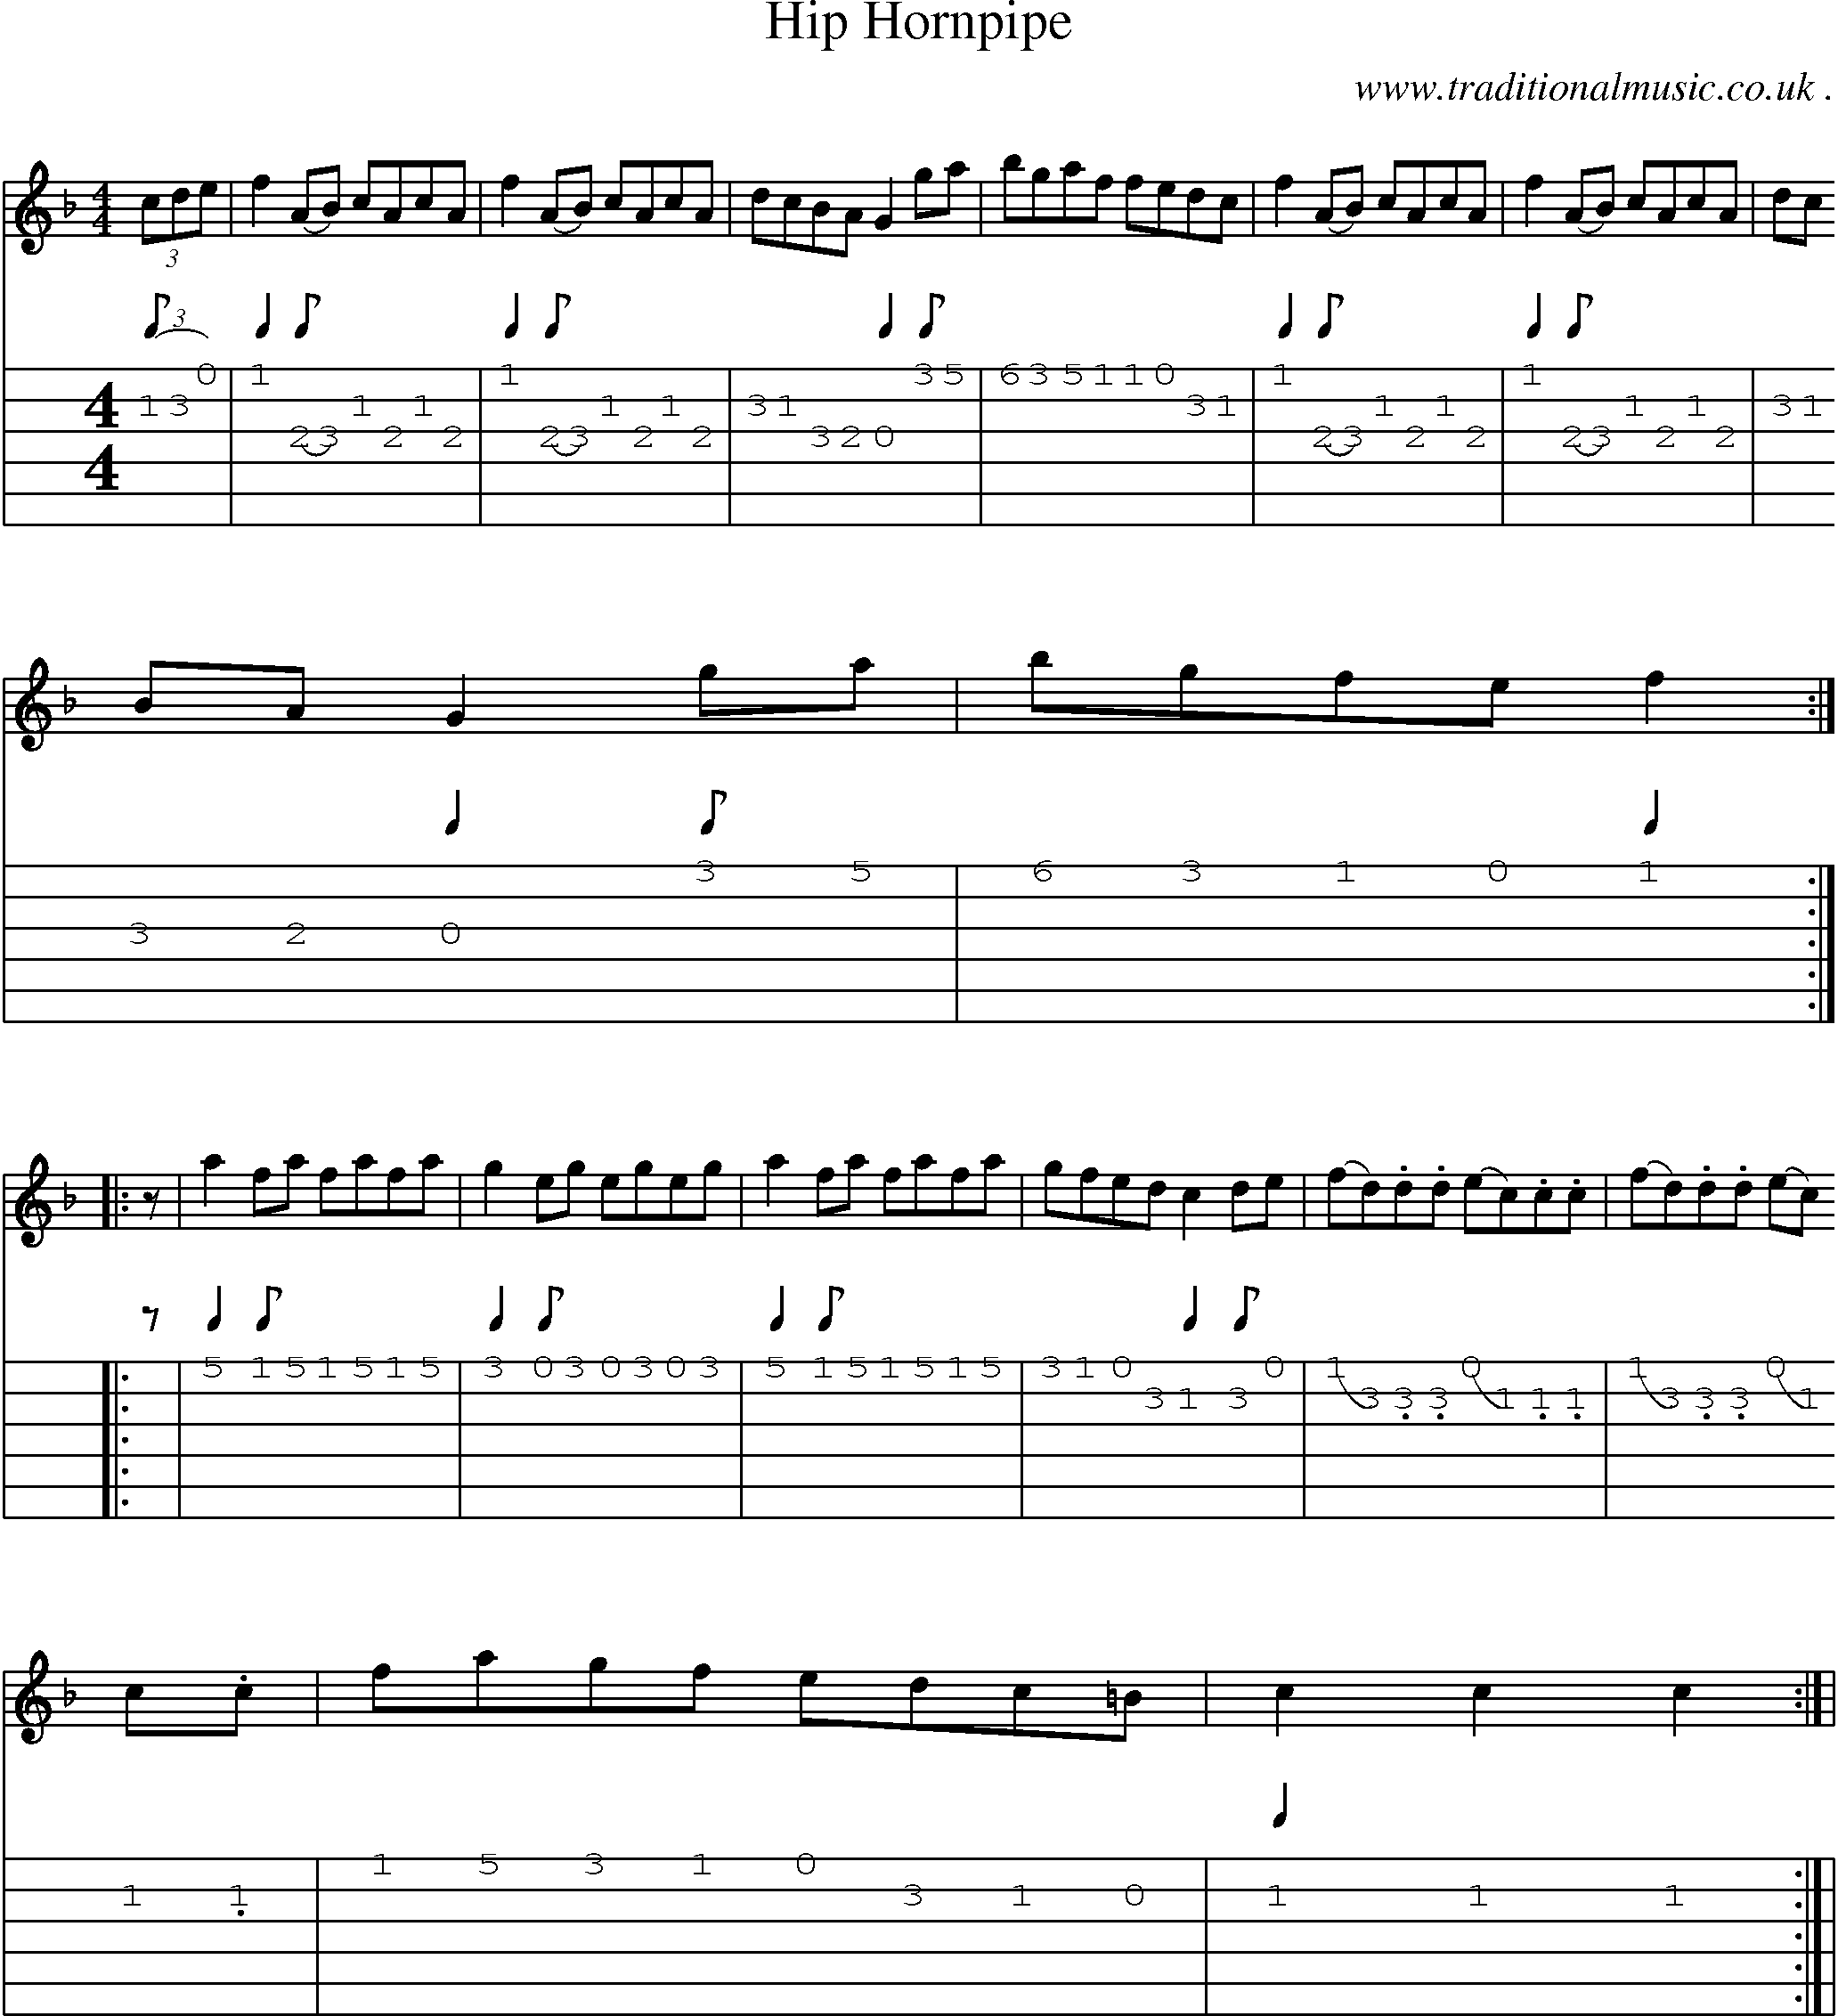 Sheet-Music and Guitar Tabs for Hip Hornpipe